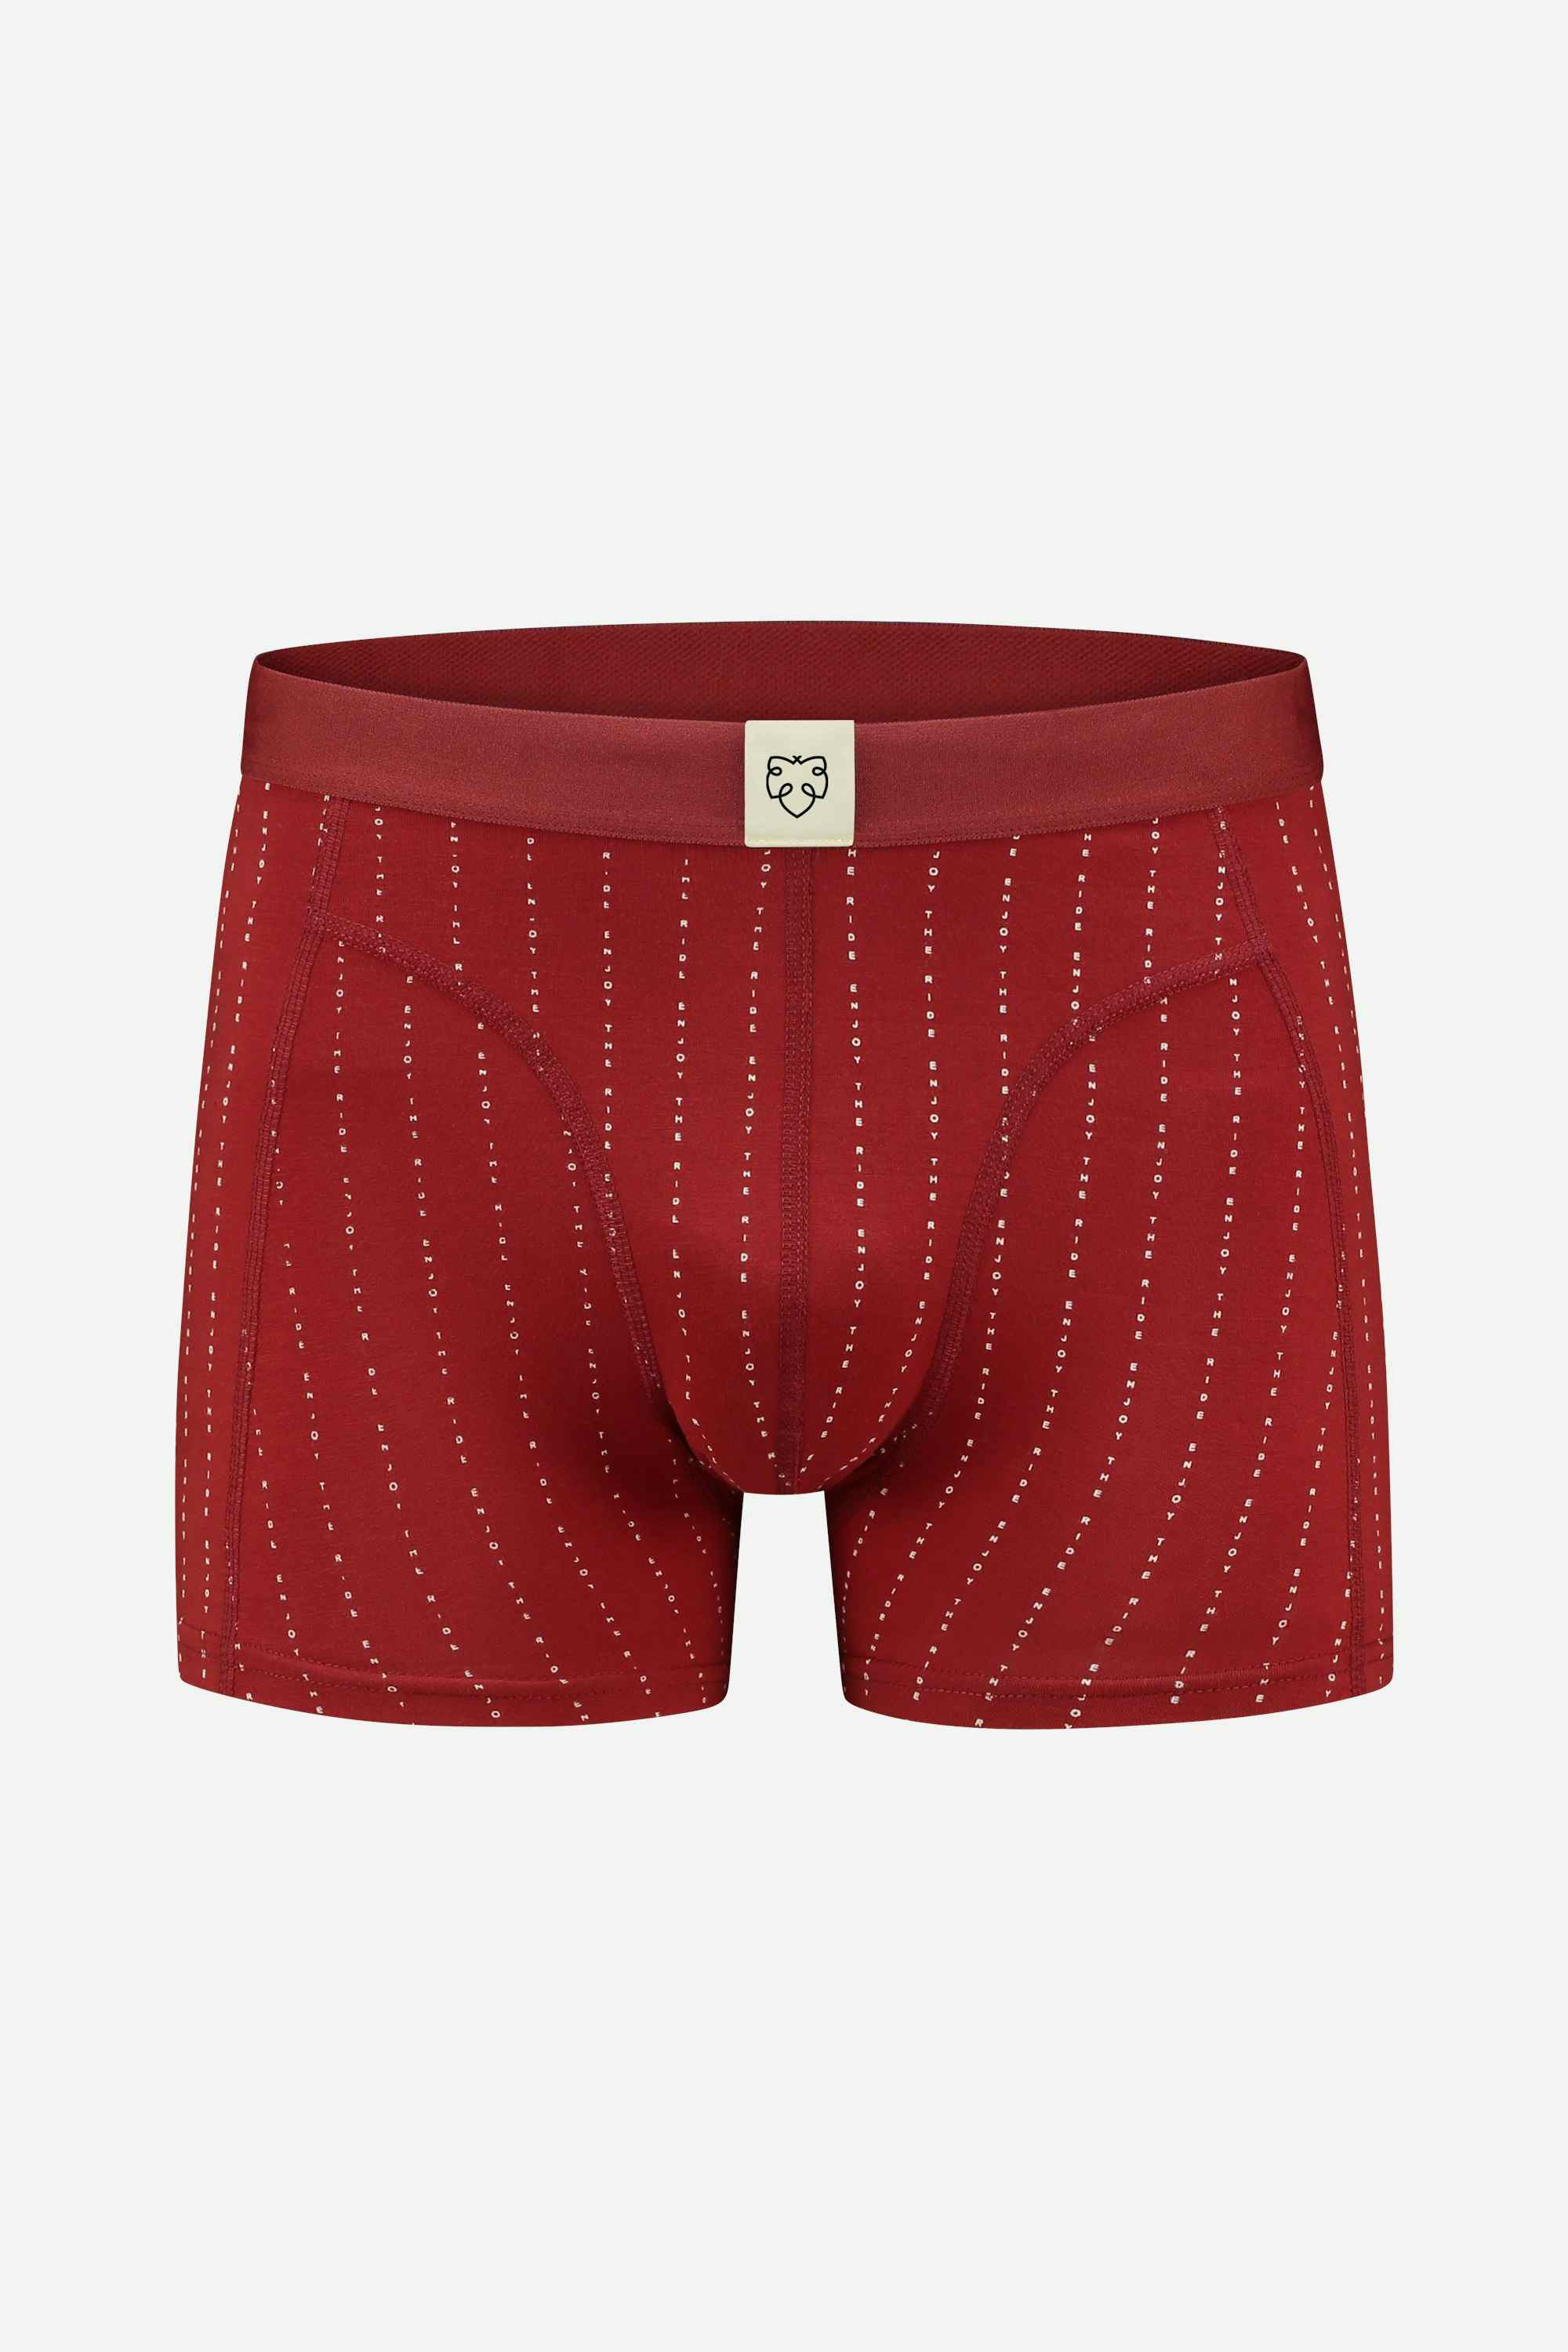 A-dam boxer brief with enjoy the ride from GOTS pure organic cotton